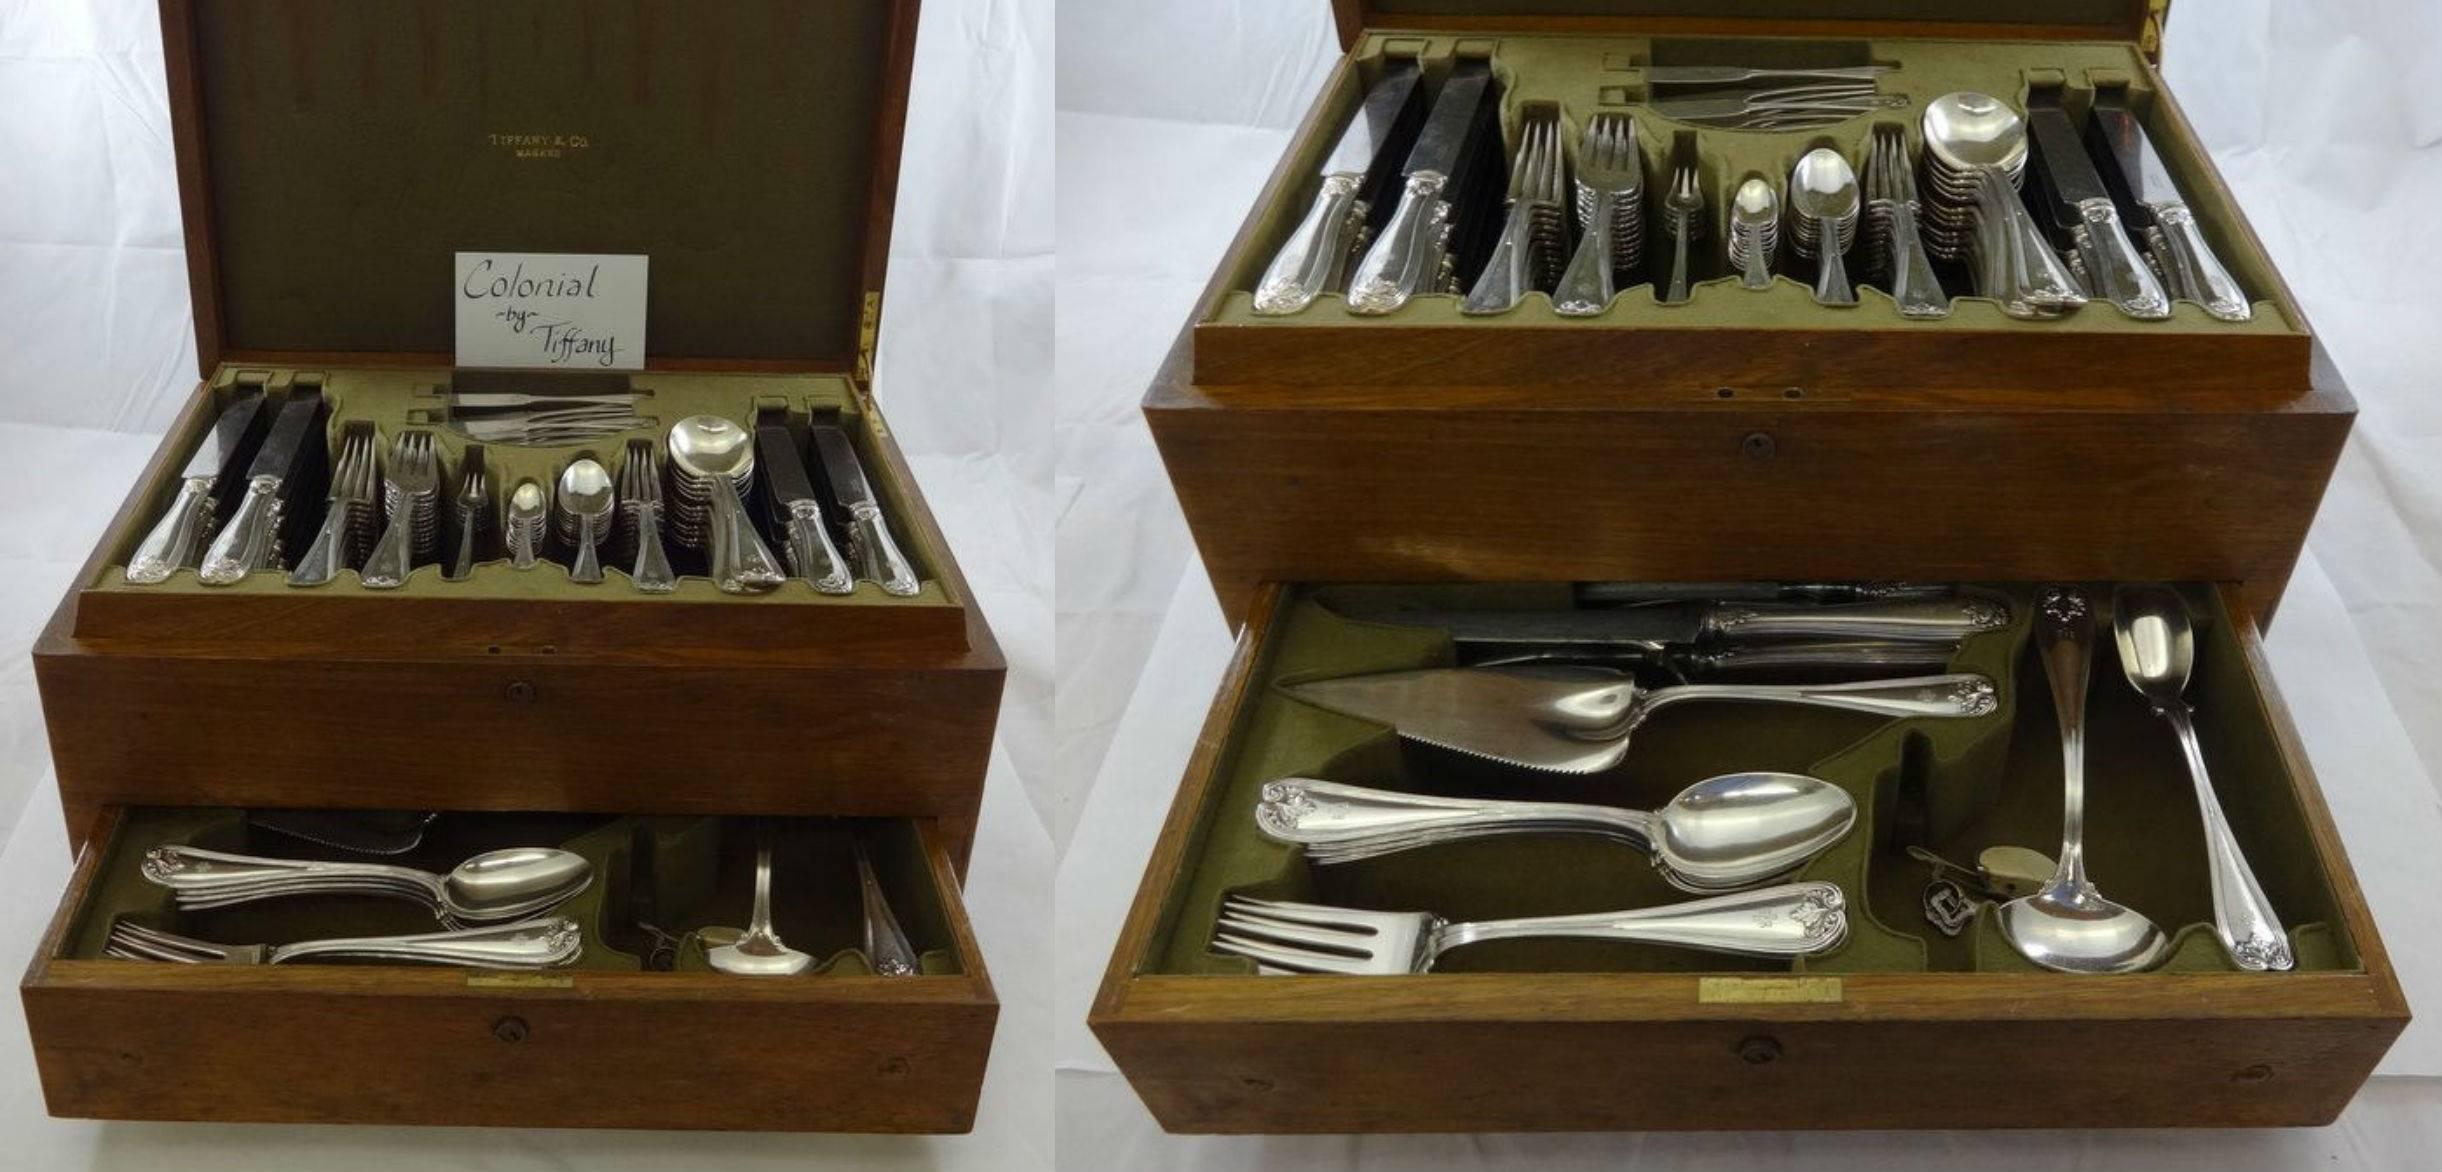 Colonial by Tiffany Sterling Silver Flatware Set Service 134 Pieces Fitted Box 4